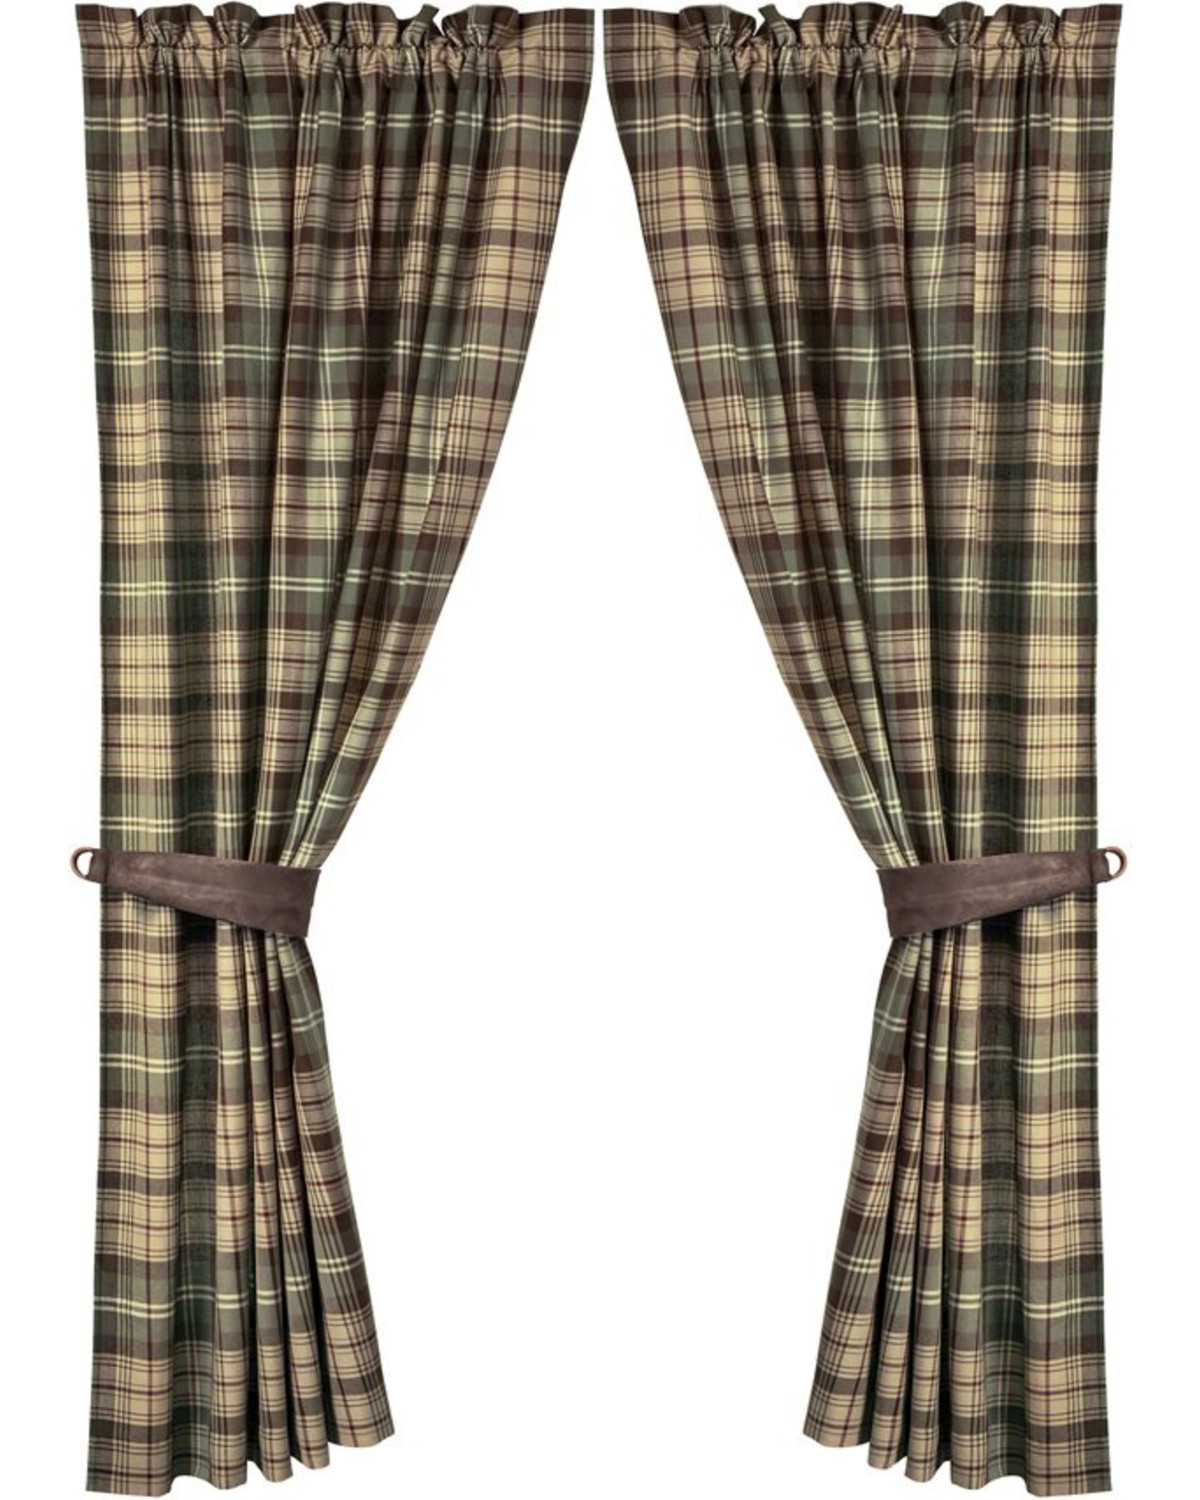 HiEnd Accents Pair of Huntsman Curtain